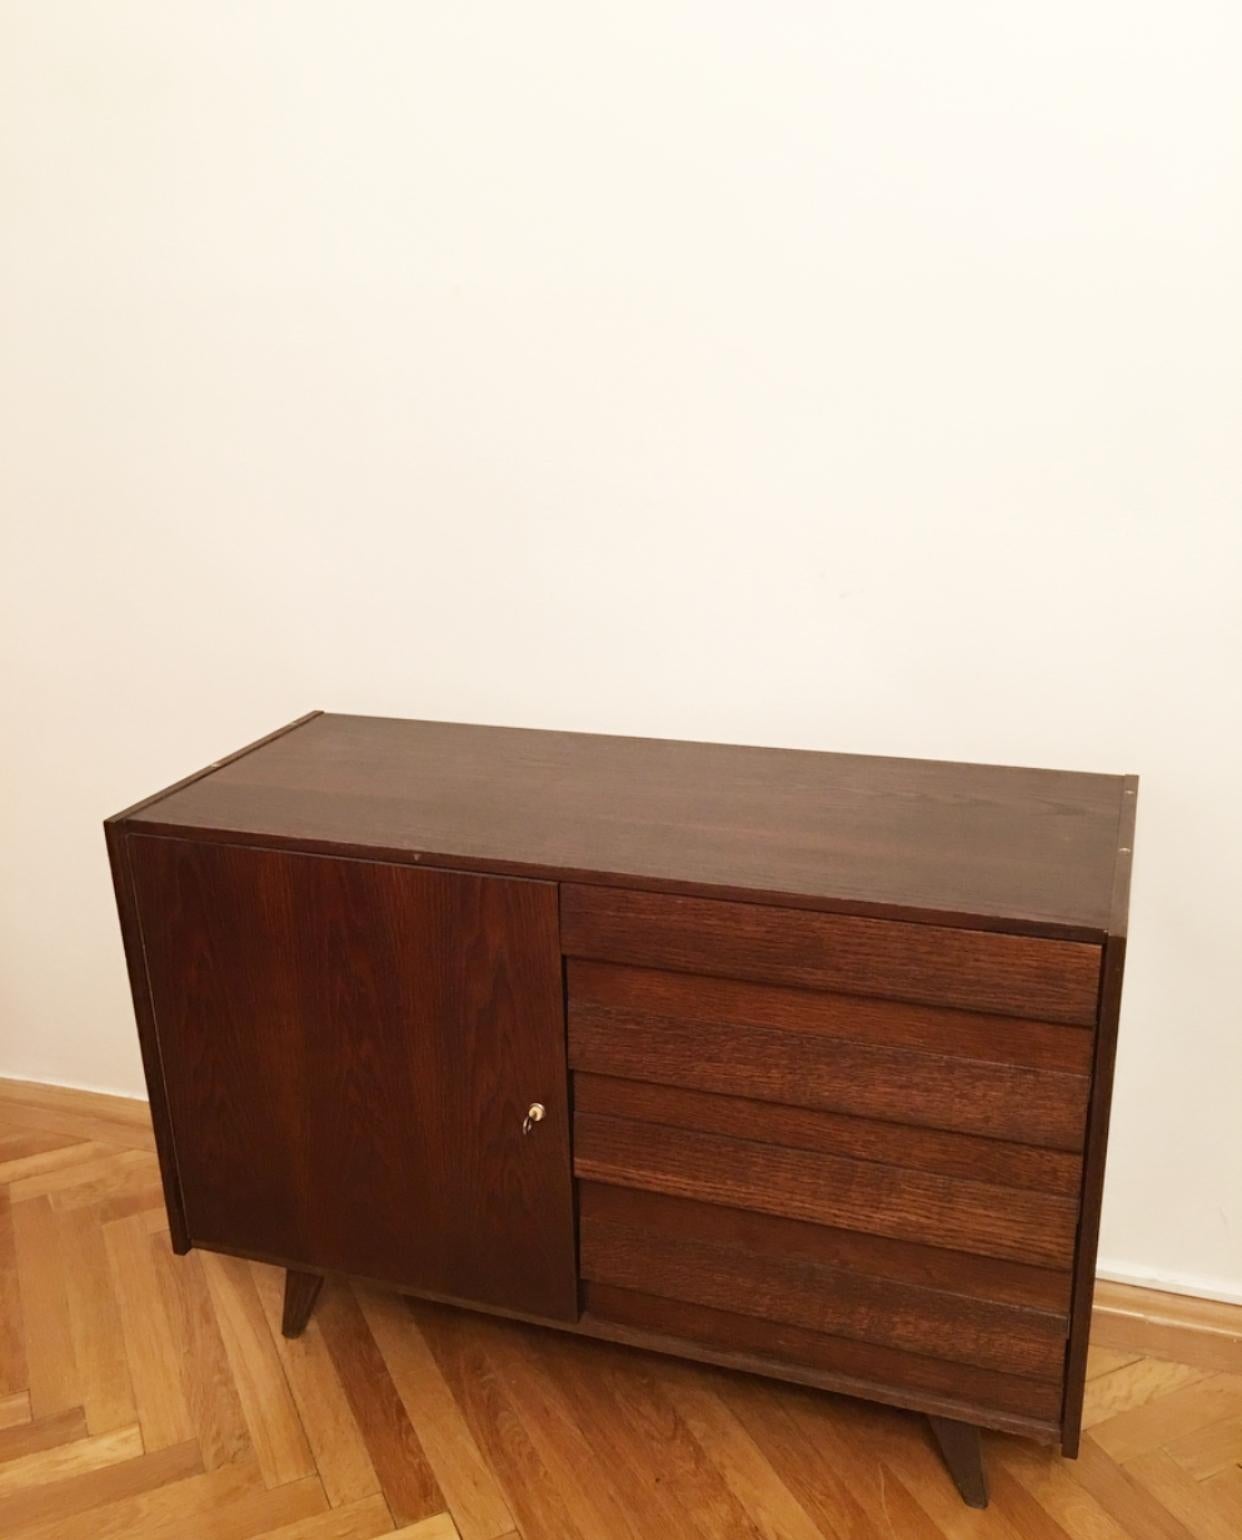 Original vintage sideboard with one door and the side drawers. Type U-460, manufactured in the 1960s by Interier Praha, designed by Jiri Jiroutek. Wooden construction and wooden drawers.
Manufacturer: Interier Praha
Country: